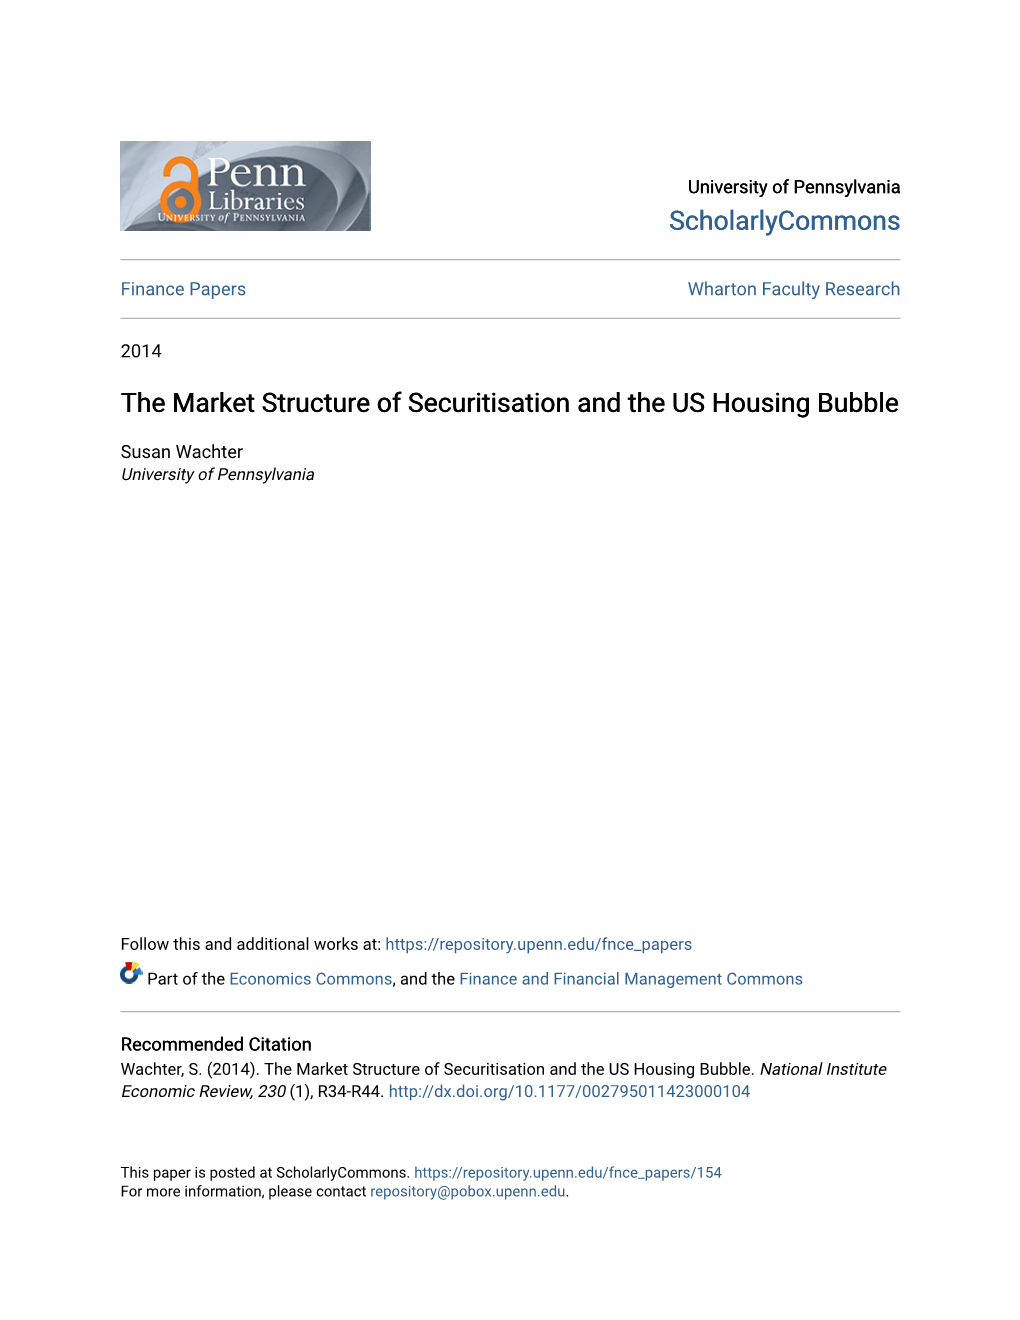 The Market Structure of Securitisation and the US Housing Bubble